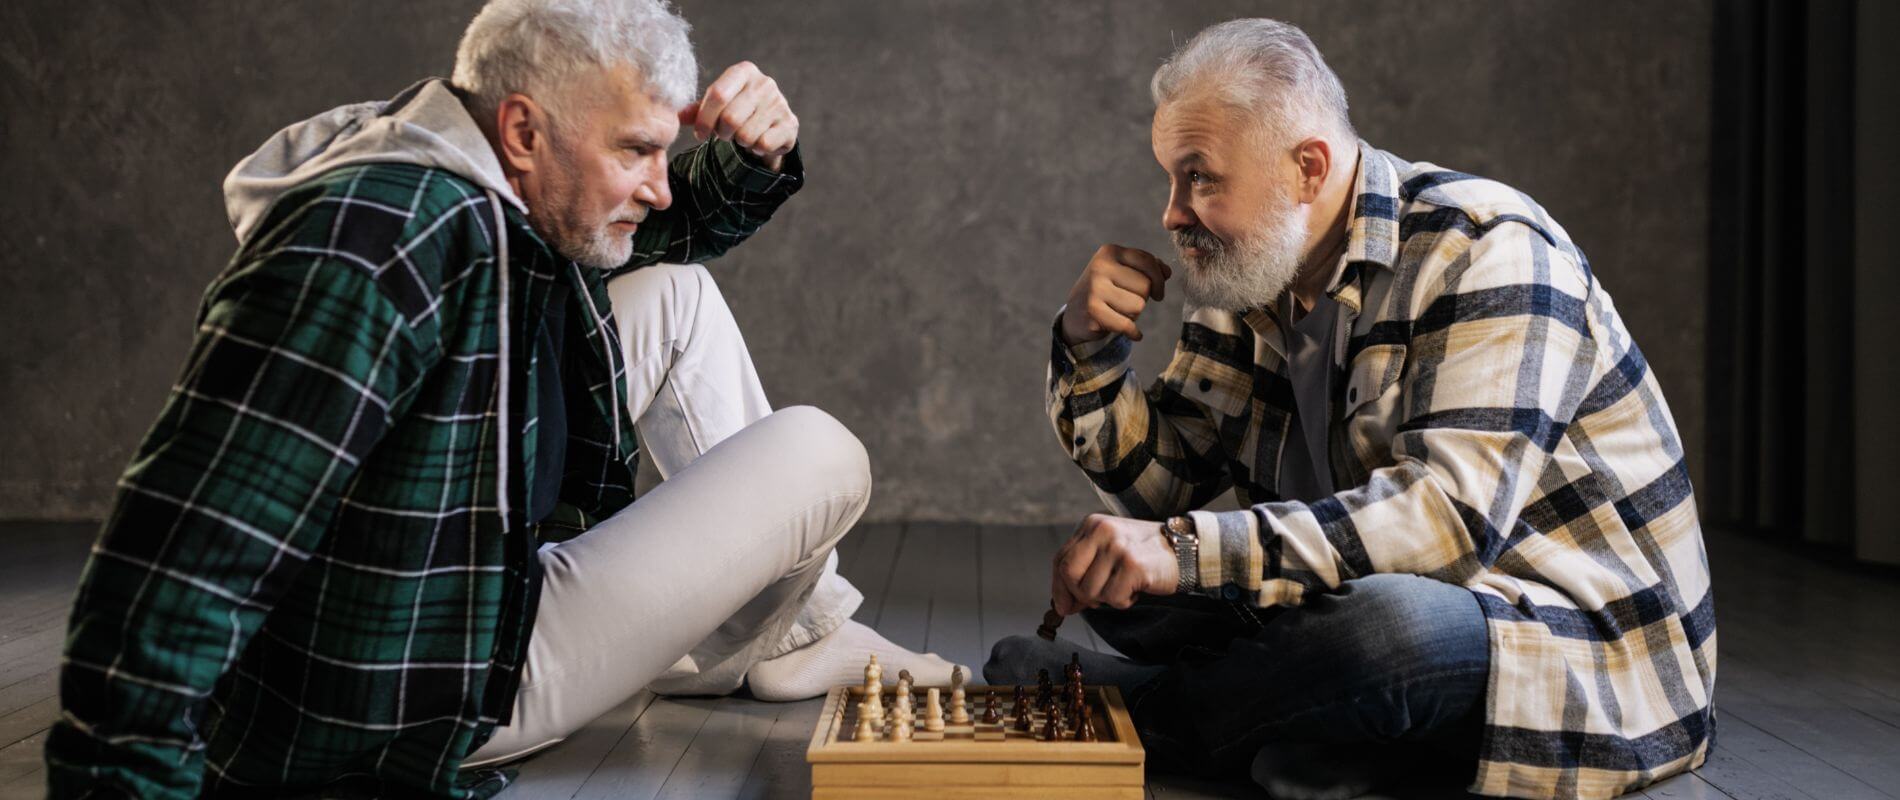 Two elderly man playing chess and discussing Medicare changes